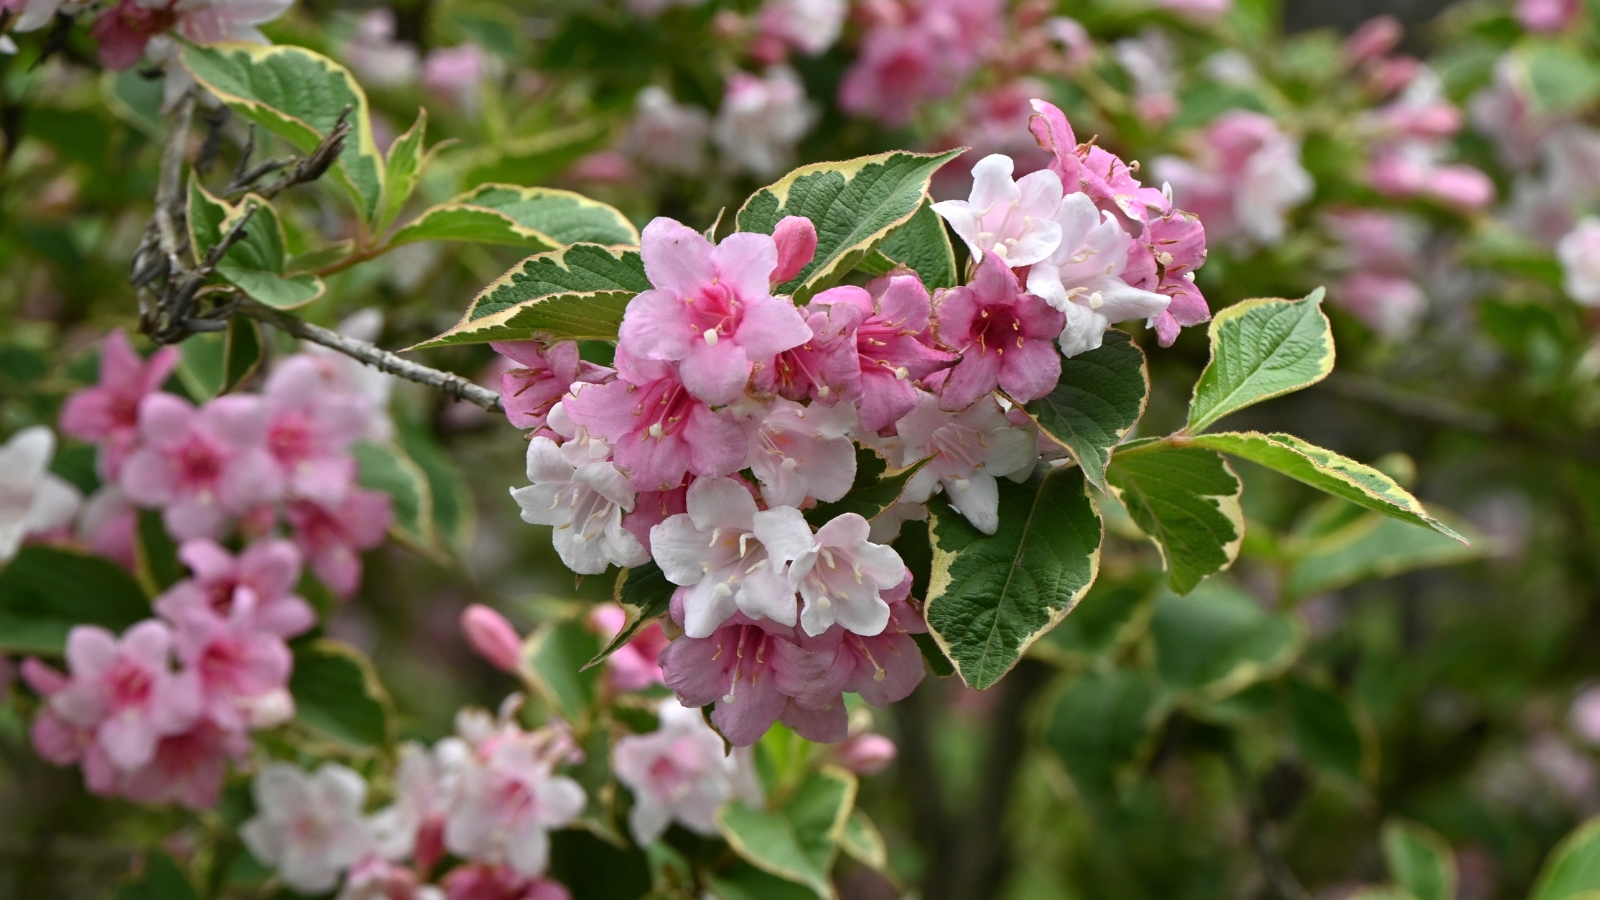 A ‘Variegated’ weigela shrub featuring pink and white blossoms amid leaves, adding a striking contrast of colors and textures to the garden landscape.